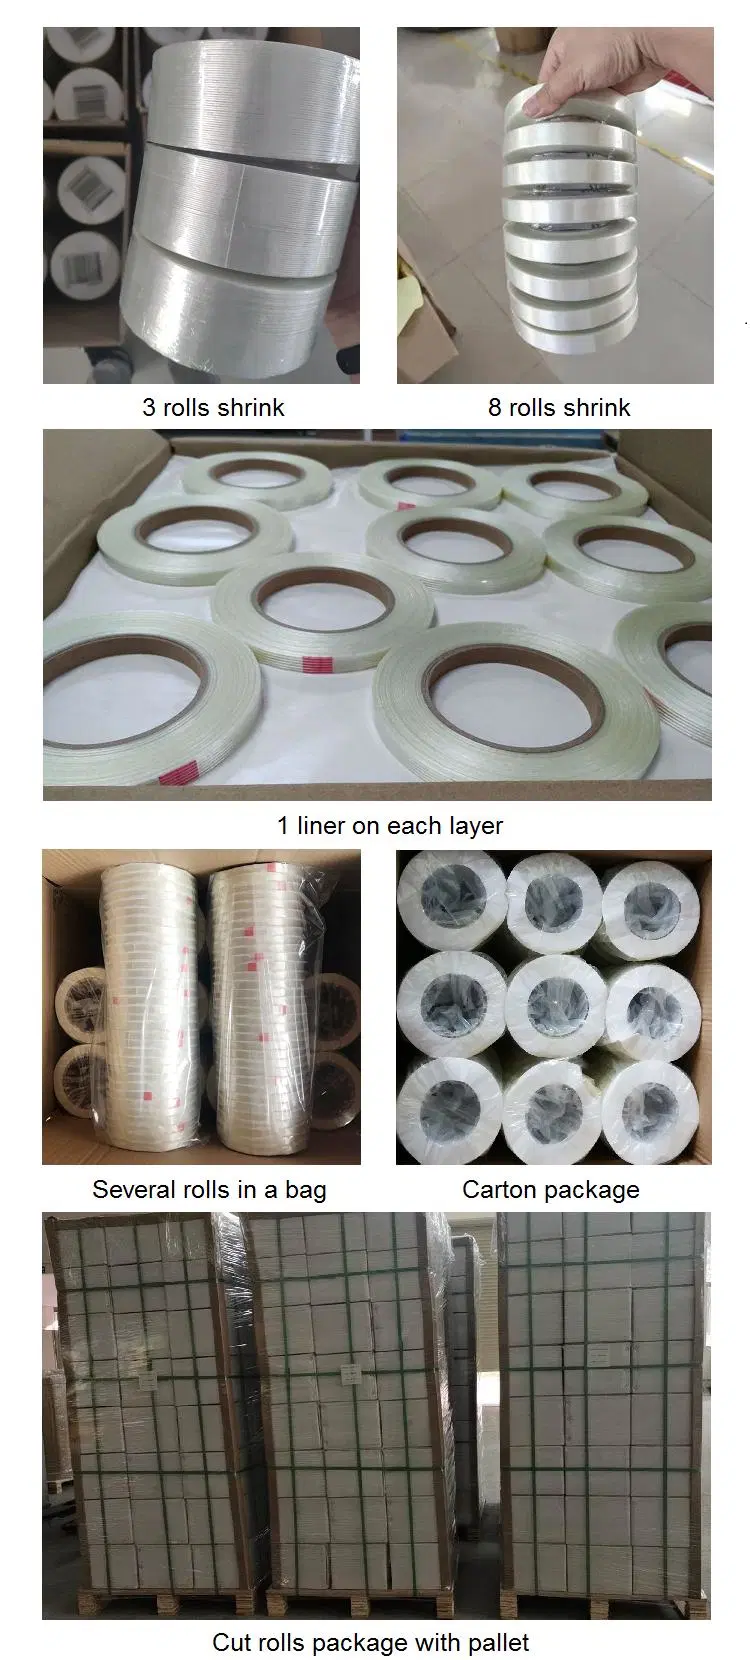 Super Strong Adhesive Fiberglass Reinforced Filament Strapping Tape for Refrigerator Packaging